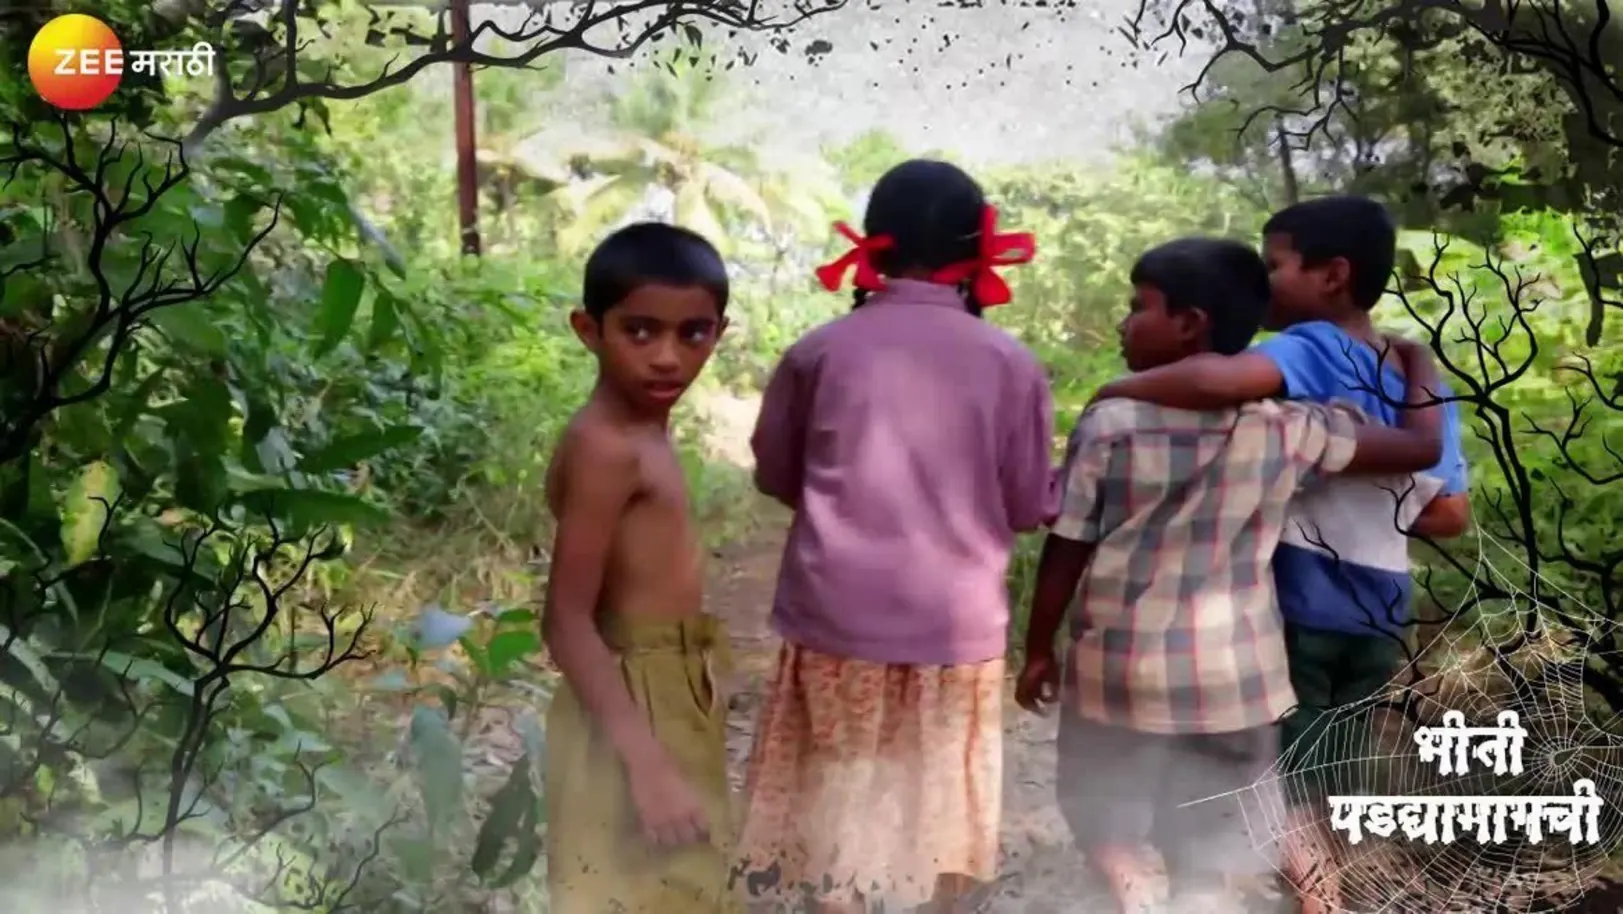 Kids play in the forest - Ratris Khel Chale 2 - Behind the Scenes 